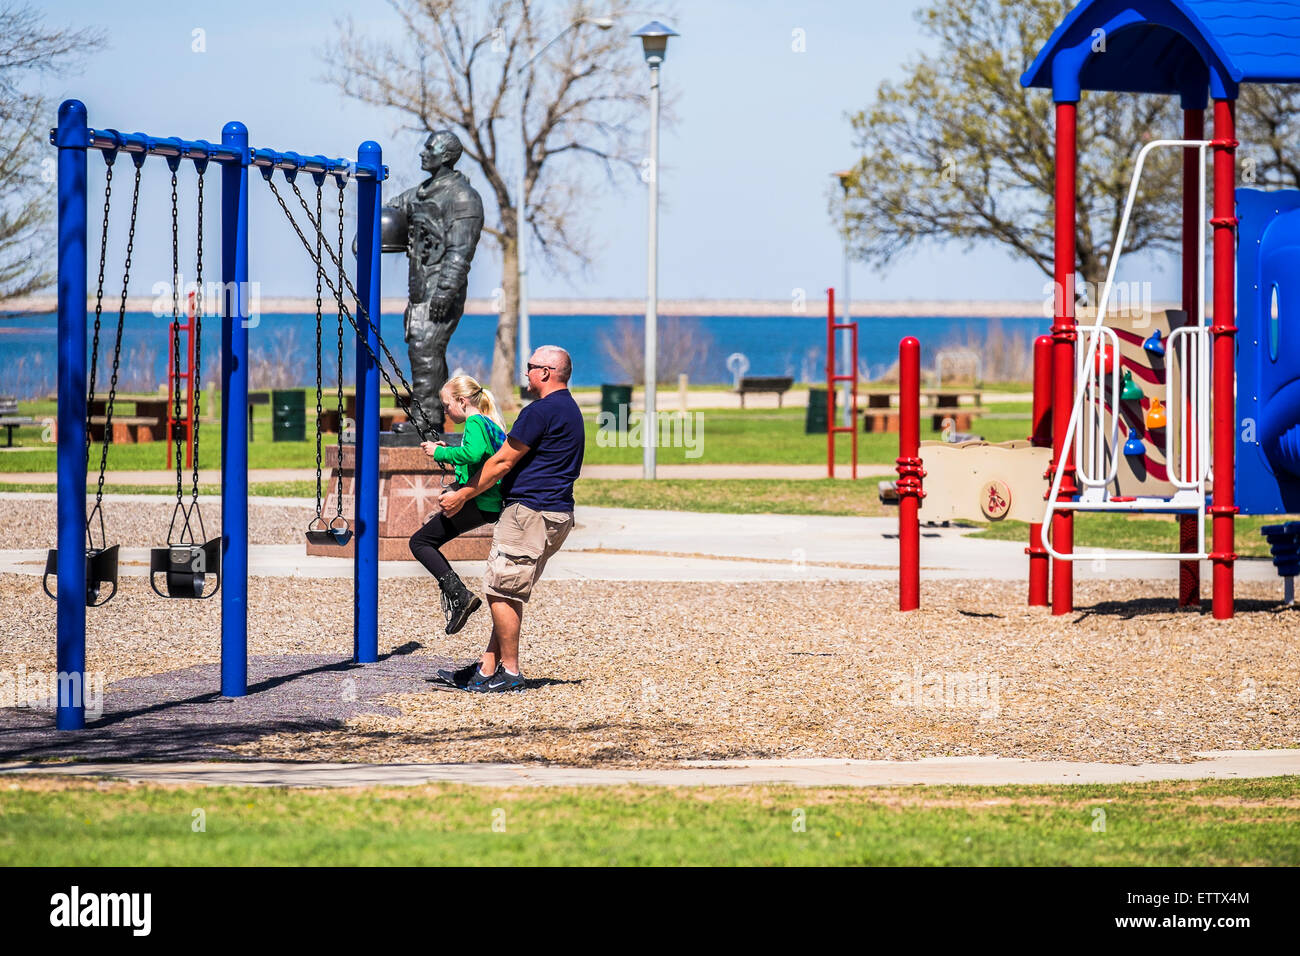 A Caucasian father swings his 10 year old daughter in a public playground in Oklahoma City, Oklahoma, USA. Stock Photo